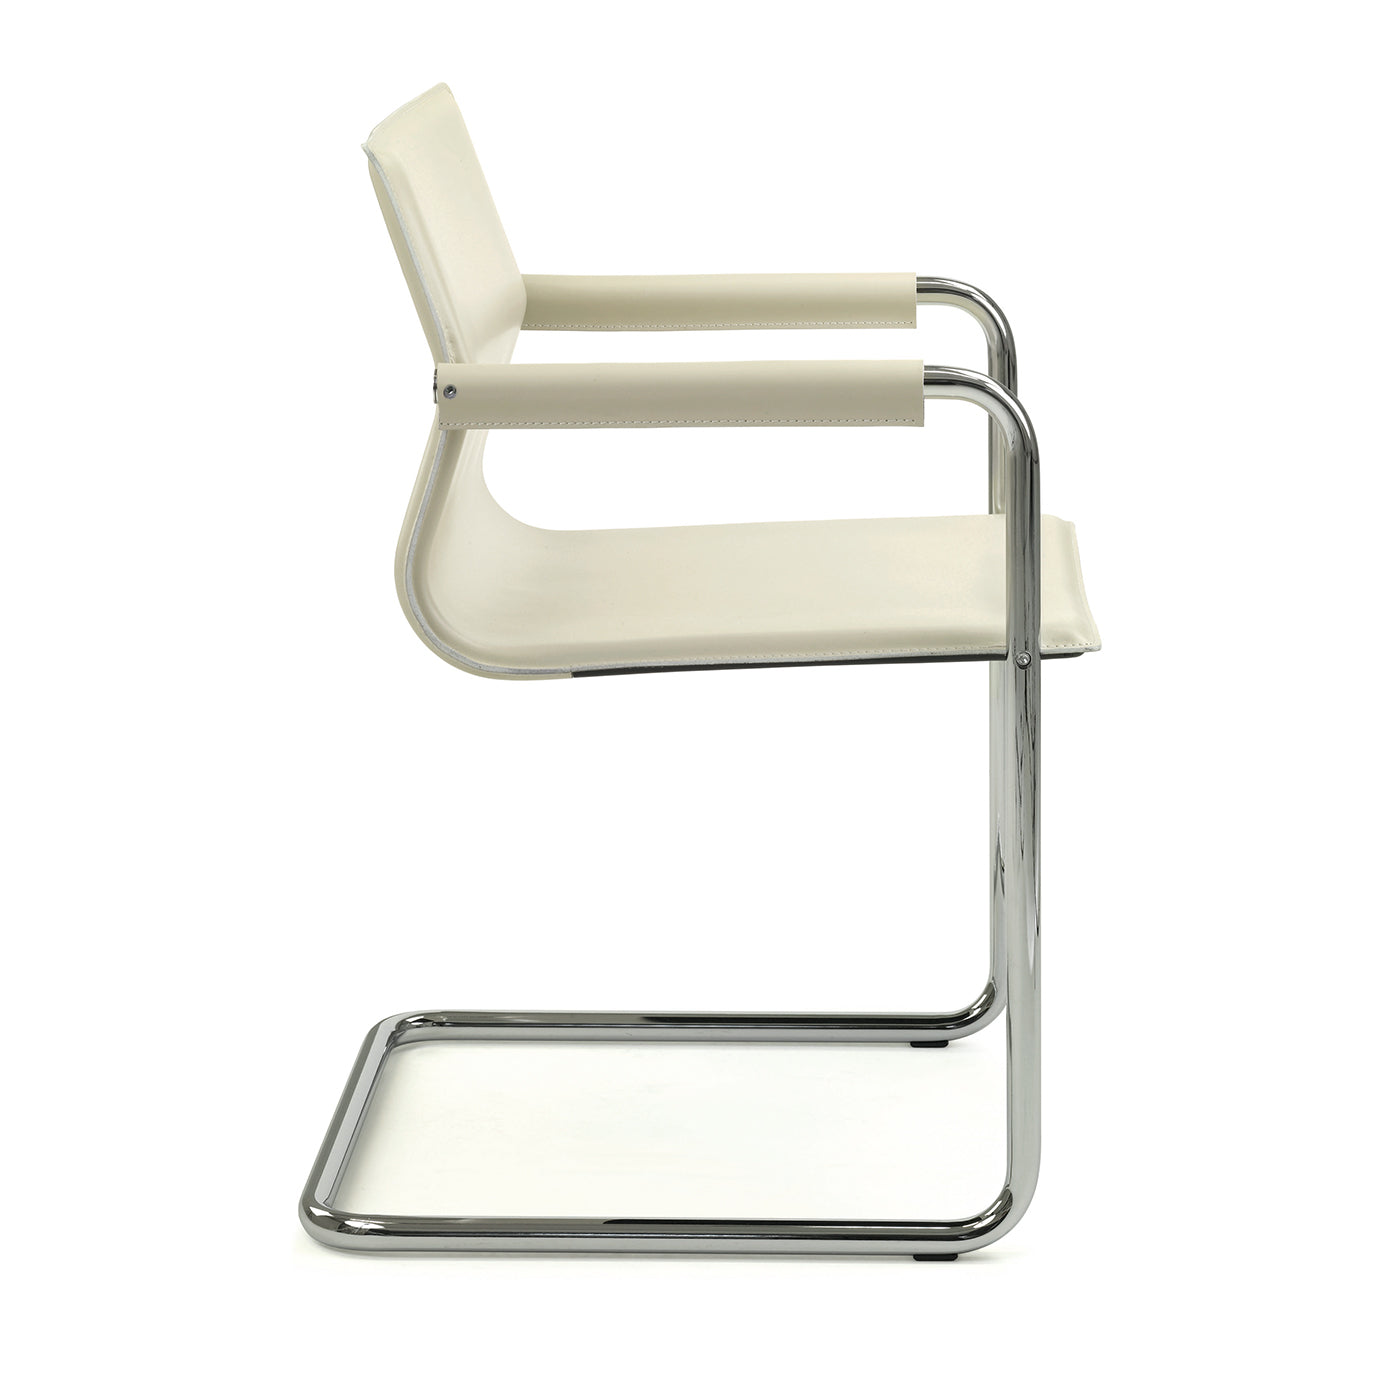  Lybra Chair With Covered Arms - Alternative view 2